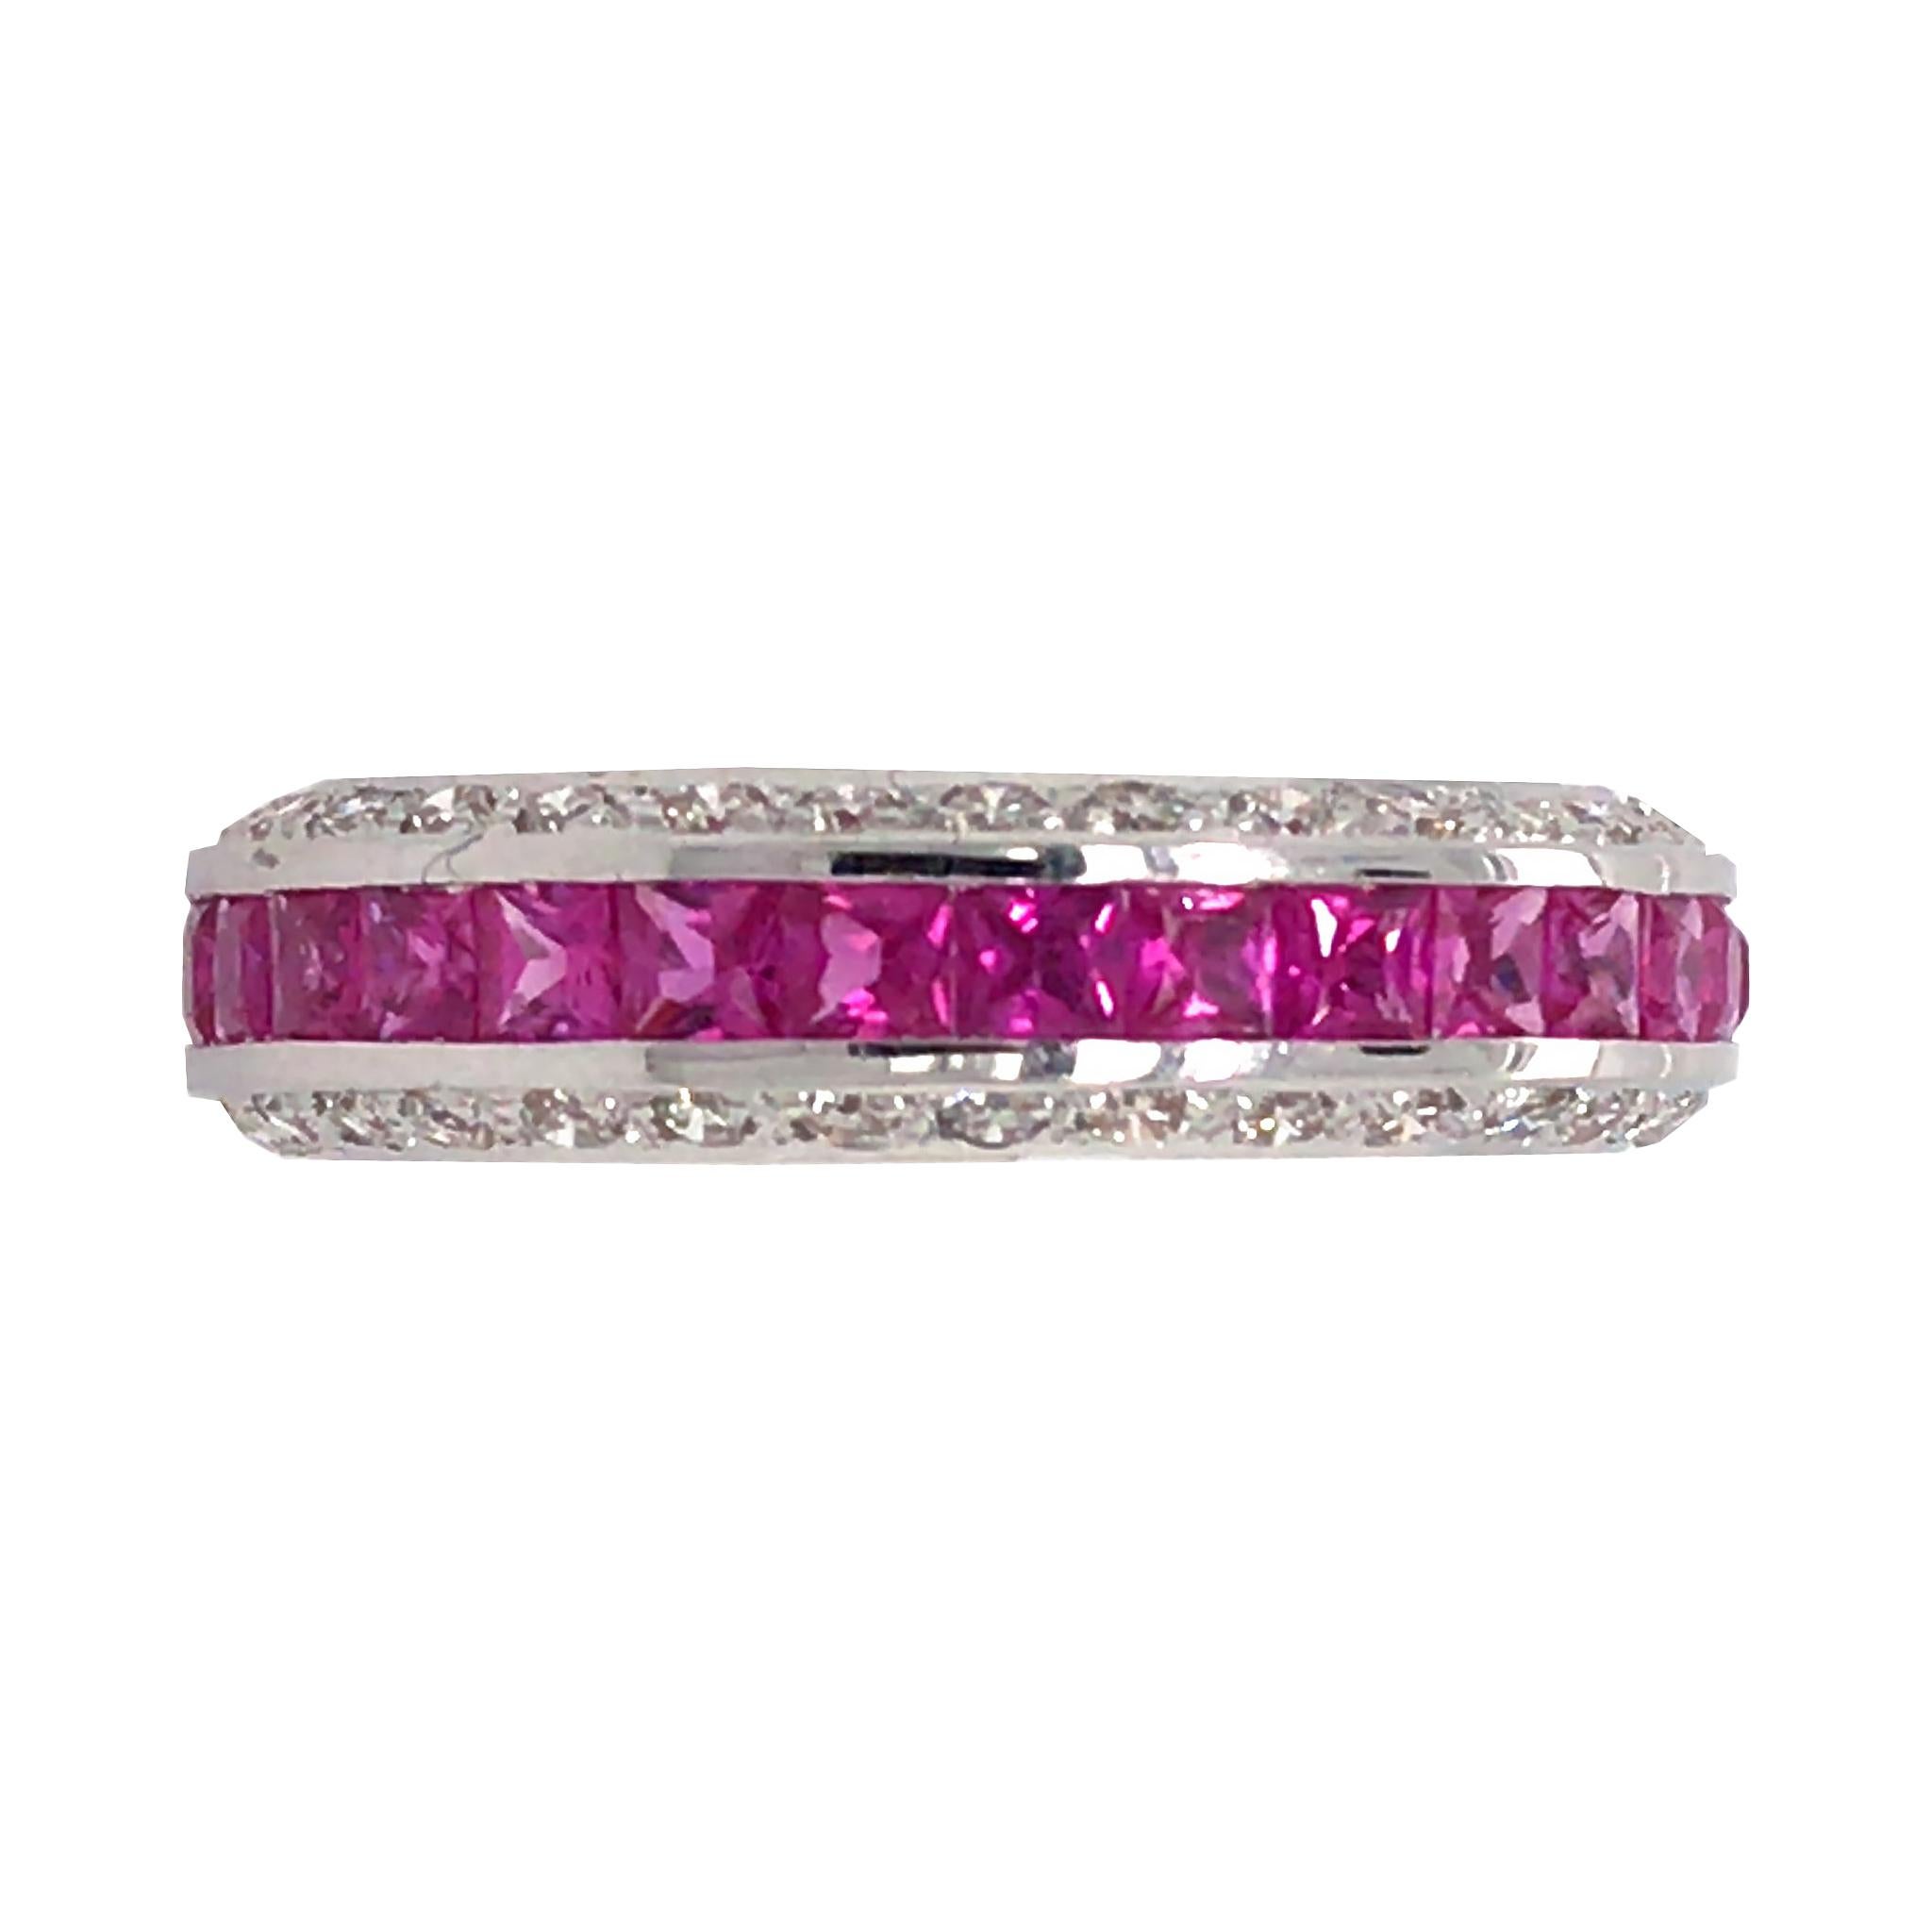 18k White Gold Pink Sapphire and Diamond Band Ring